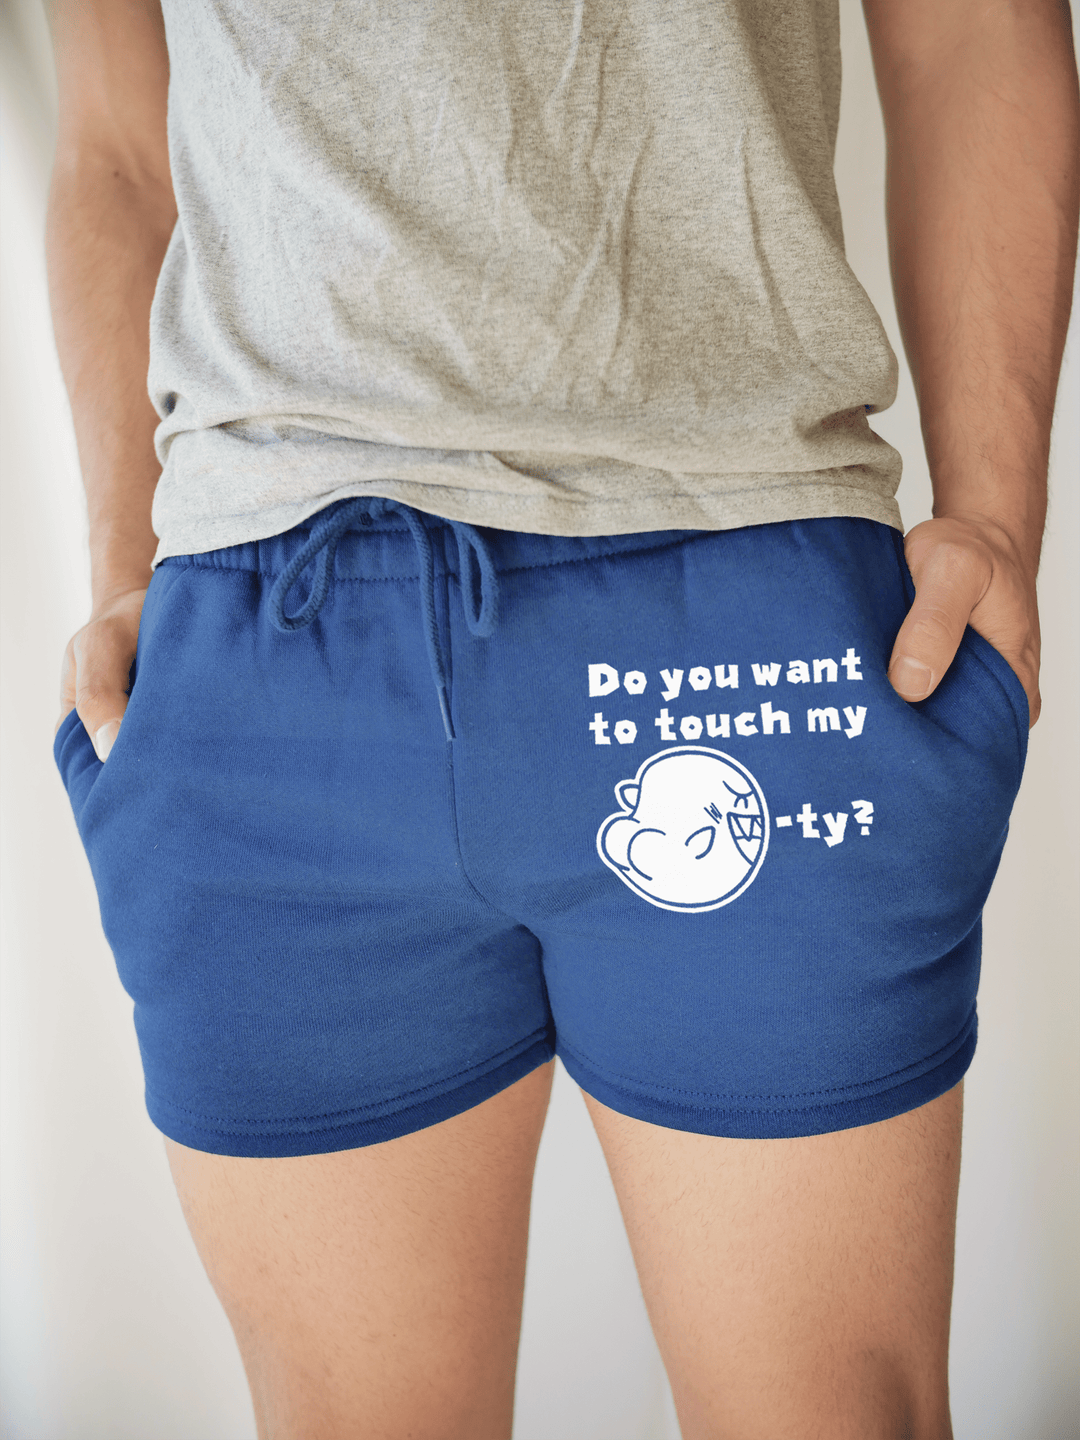 PixelThat Punderwear Shorts Royal Blue / S / Front Do You Want To Touch My Booty? Men's Gym Shorts